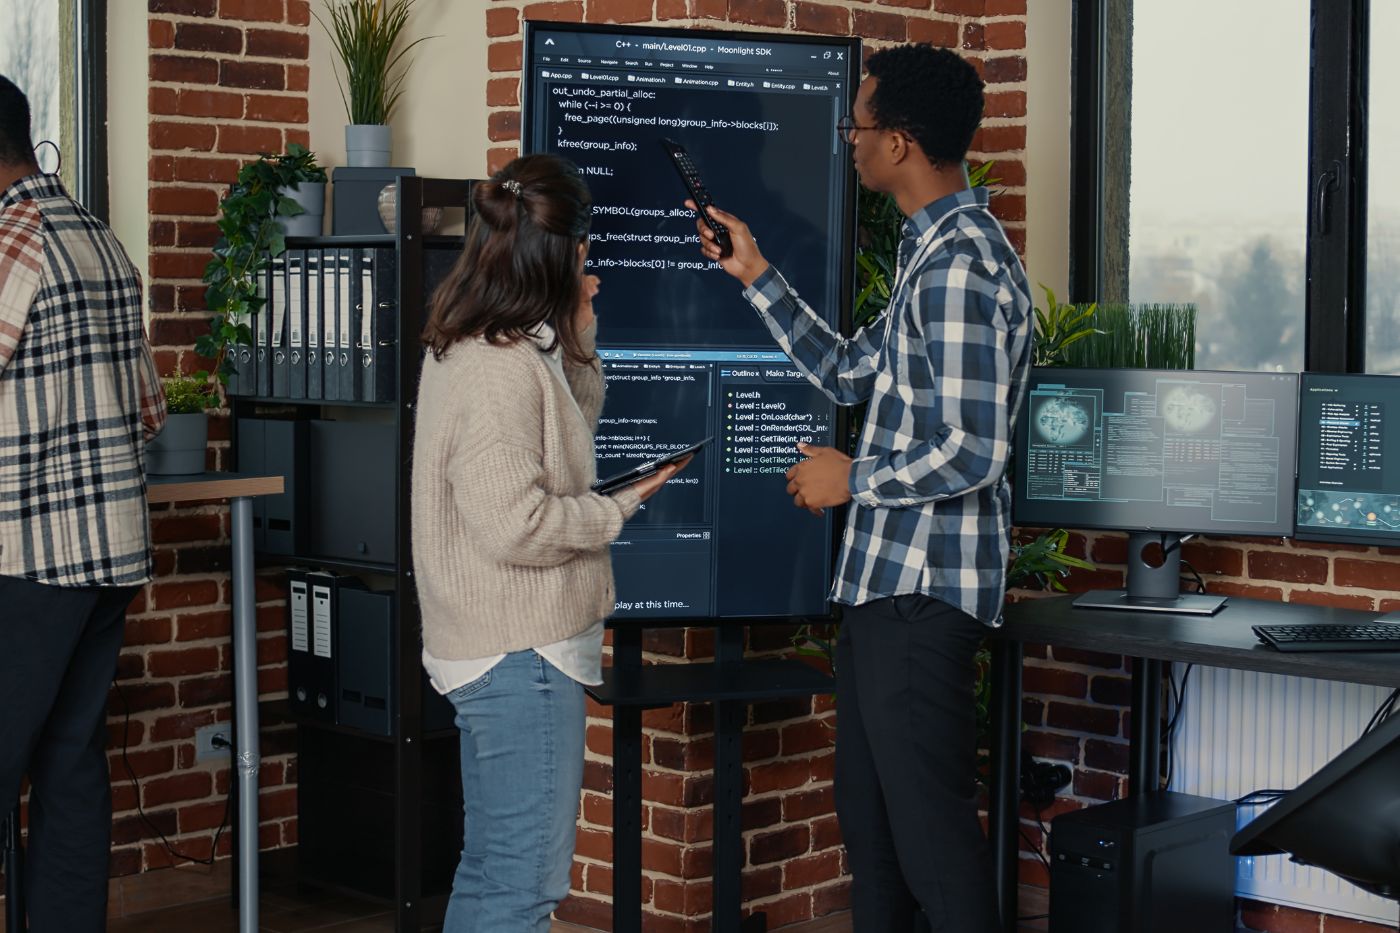 Two people standing in front of a computer screen.